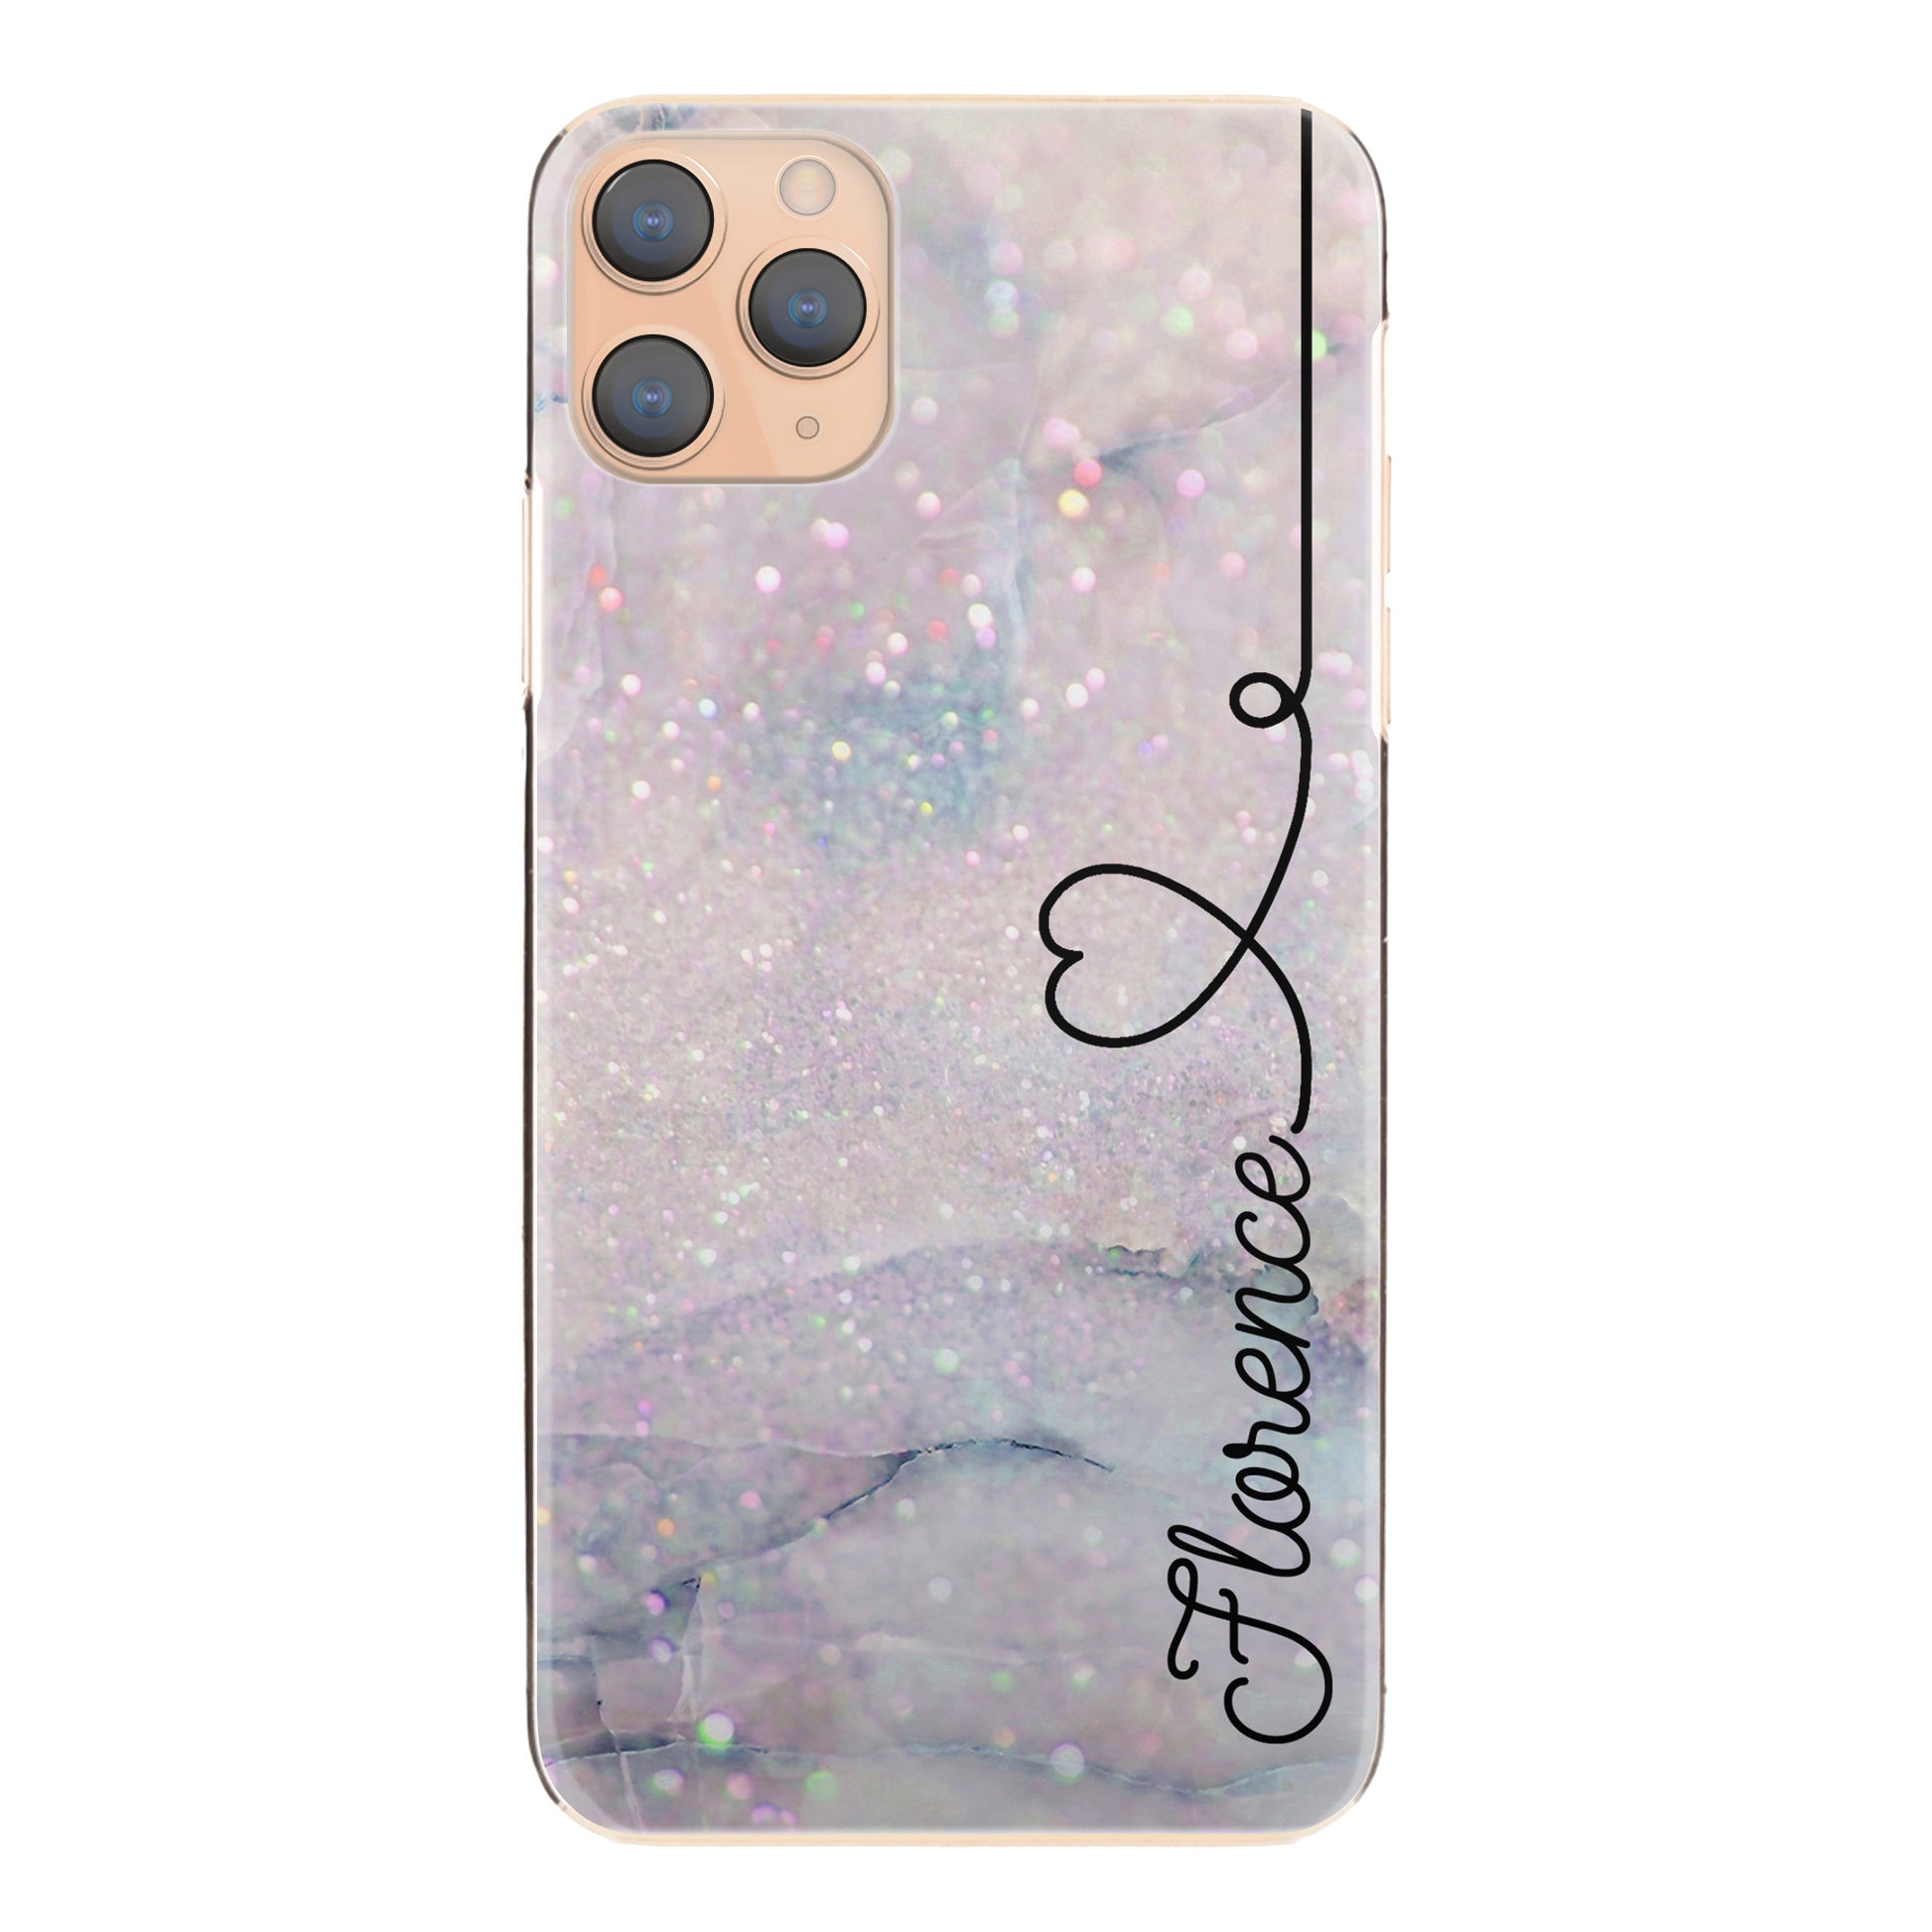 Personalised Huawei Phone Hard Case with Stylish Text and Heart Line on Textured Glitter Effect